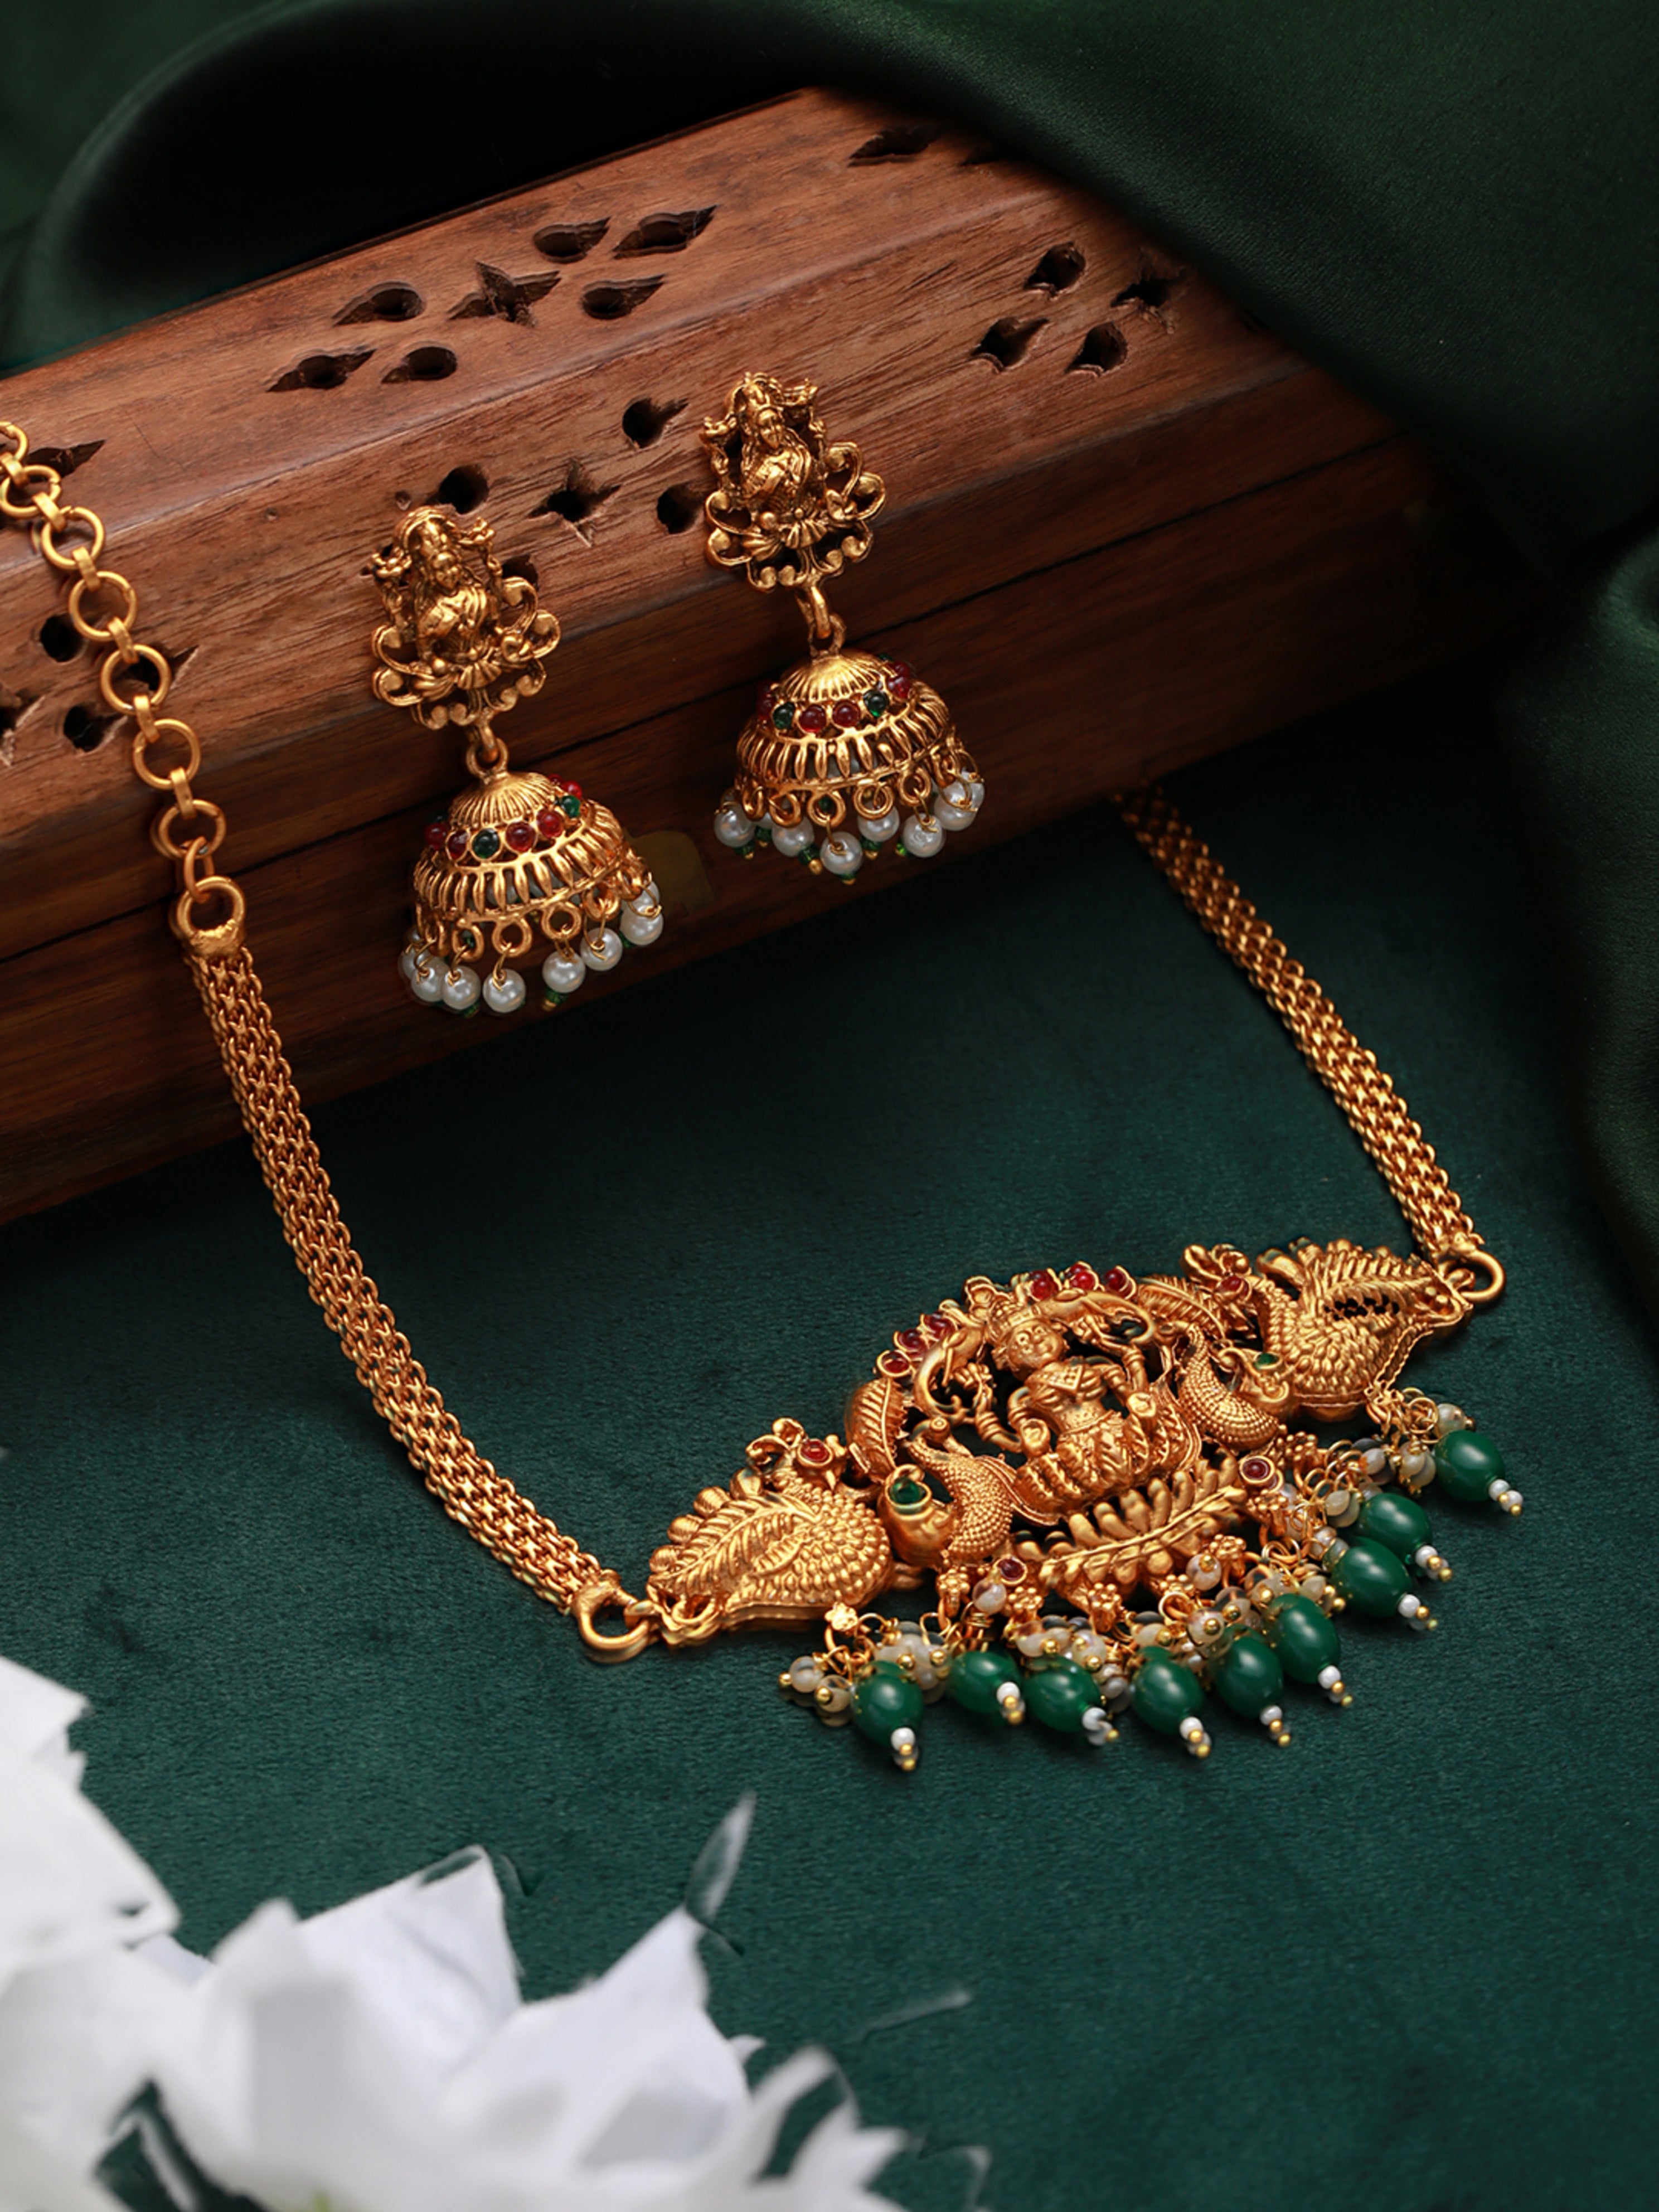 Gold-Plated Red & Green Stone-Studded & Beads-Beaded Lakshmi Temple Jewellery Set - Jazzandsizzle